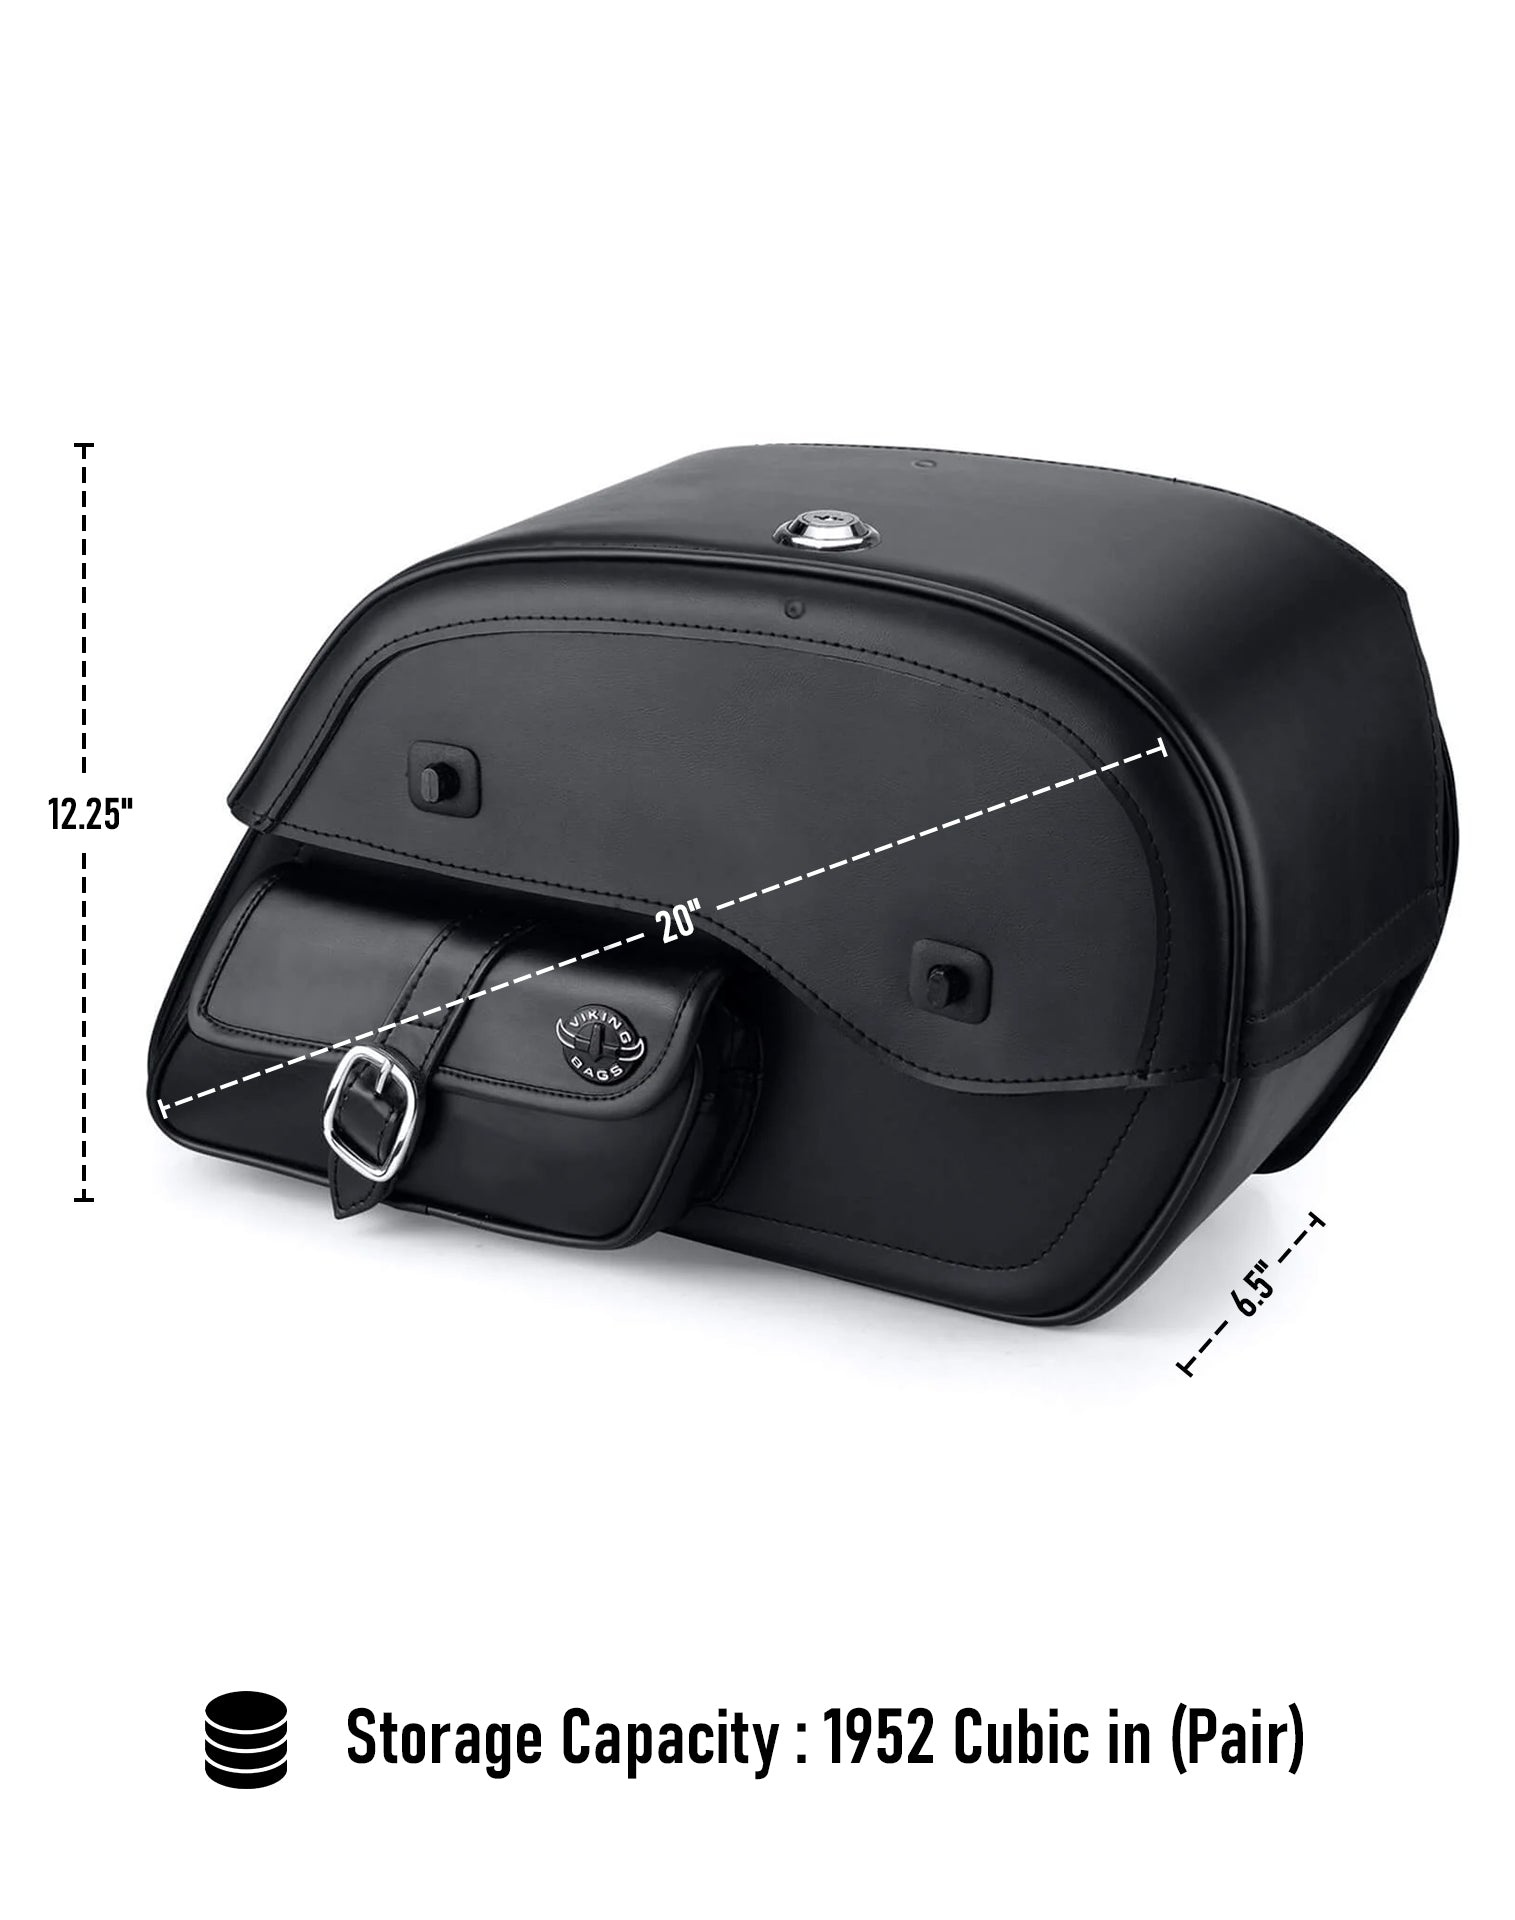 Viking Essential Side Pocket Large Kawasaki Mean Streak 1500 Leather Motorcycle Saddlebags Can Store Your Ridings Gears